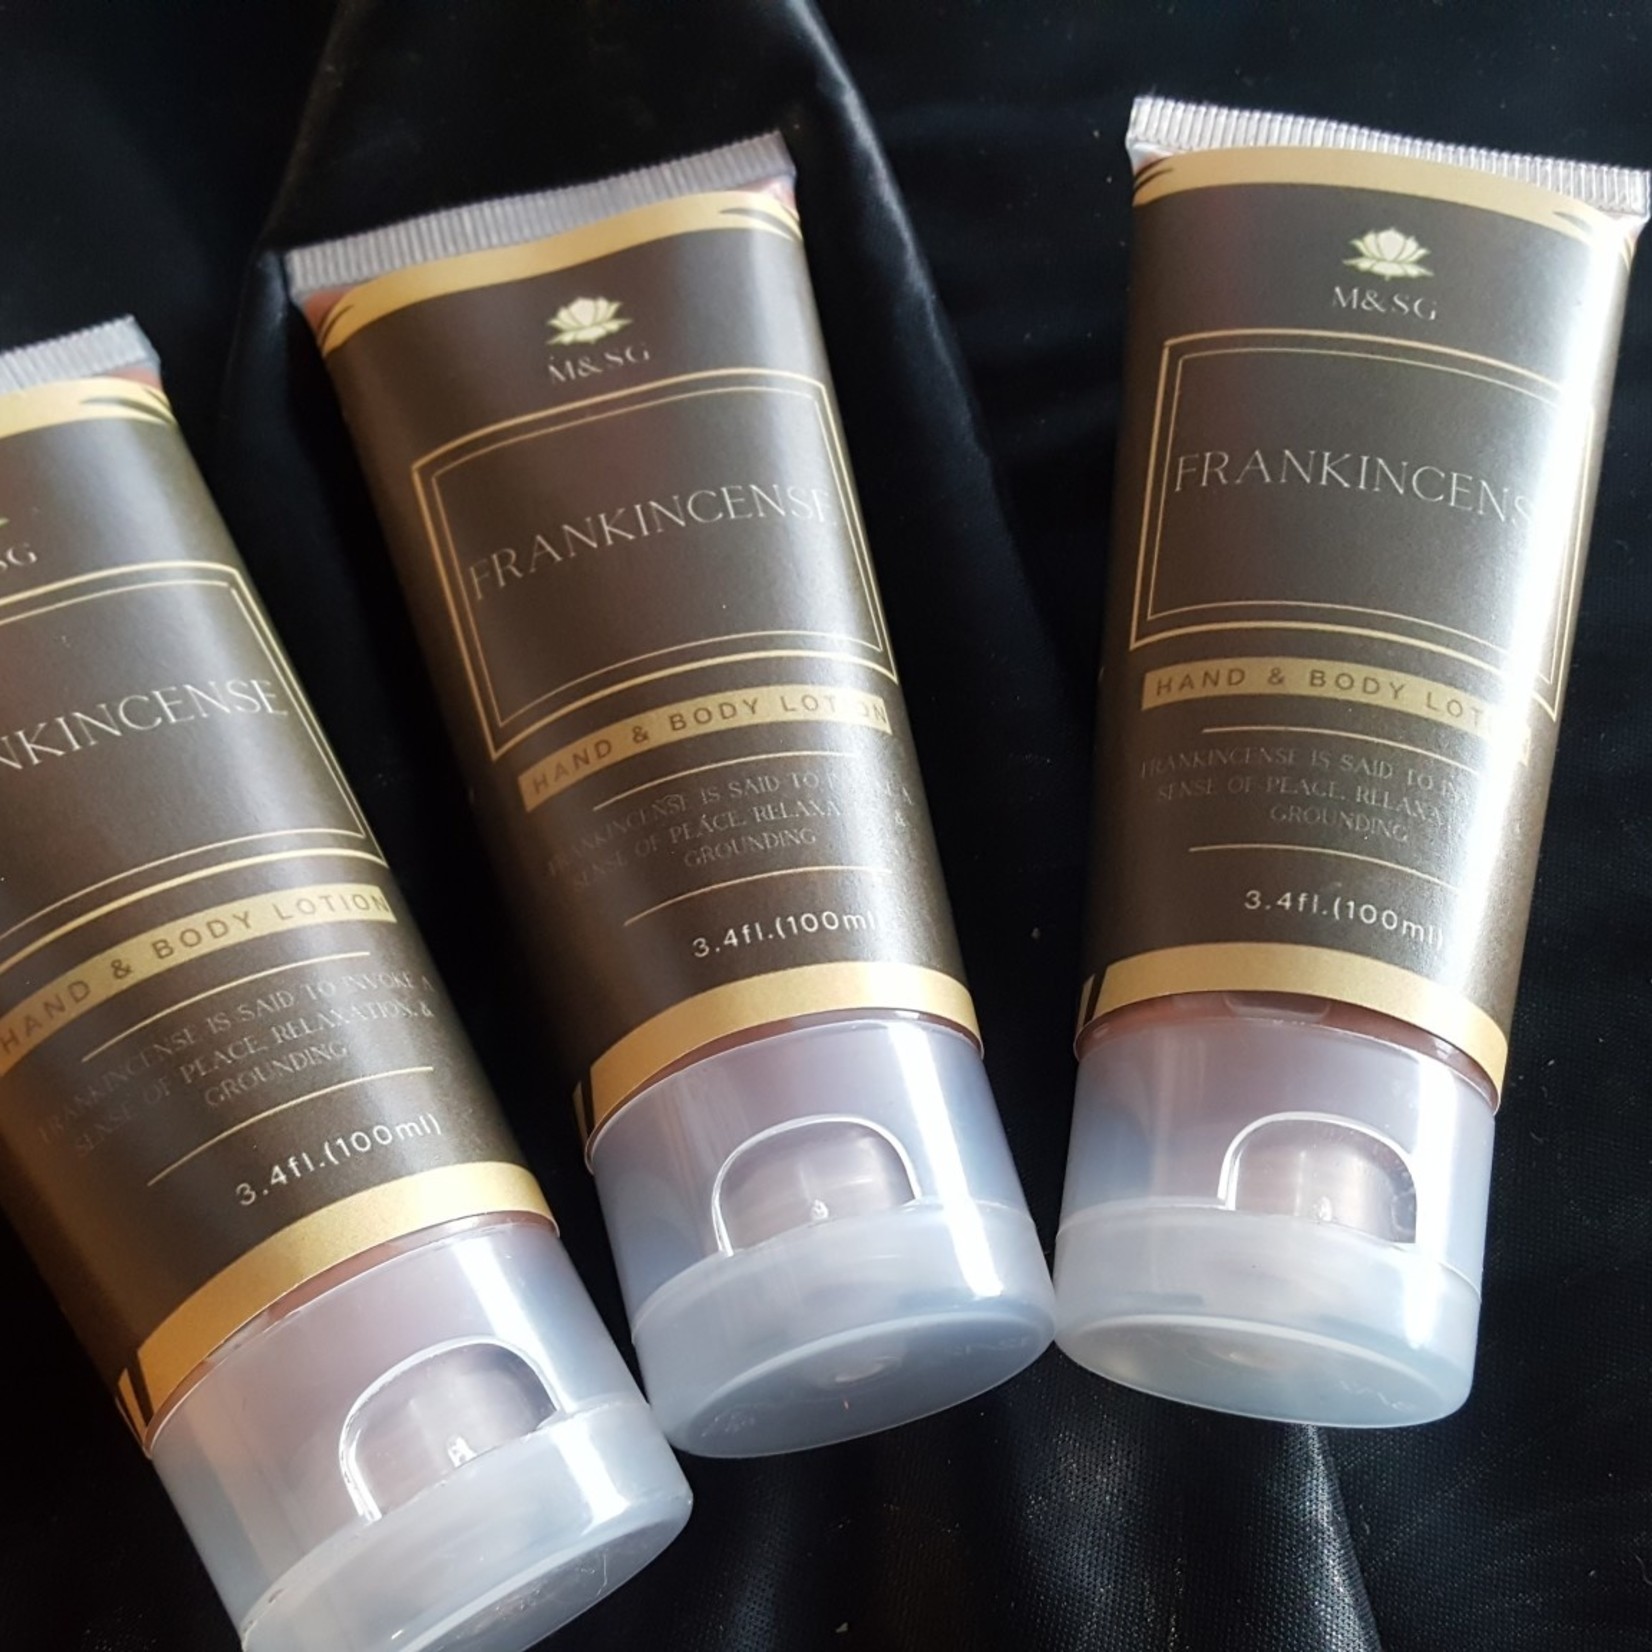 Frankincense Hand & Body Lotion (MSG)